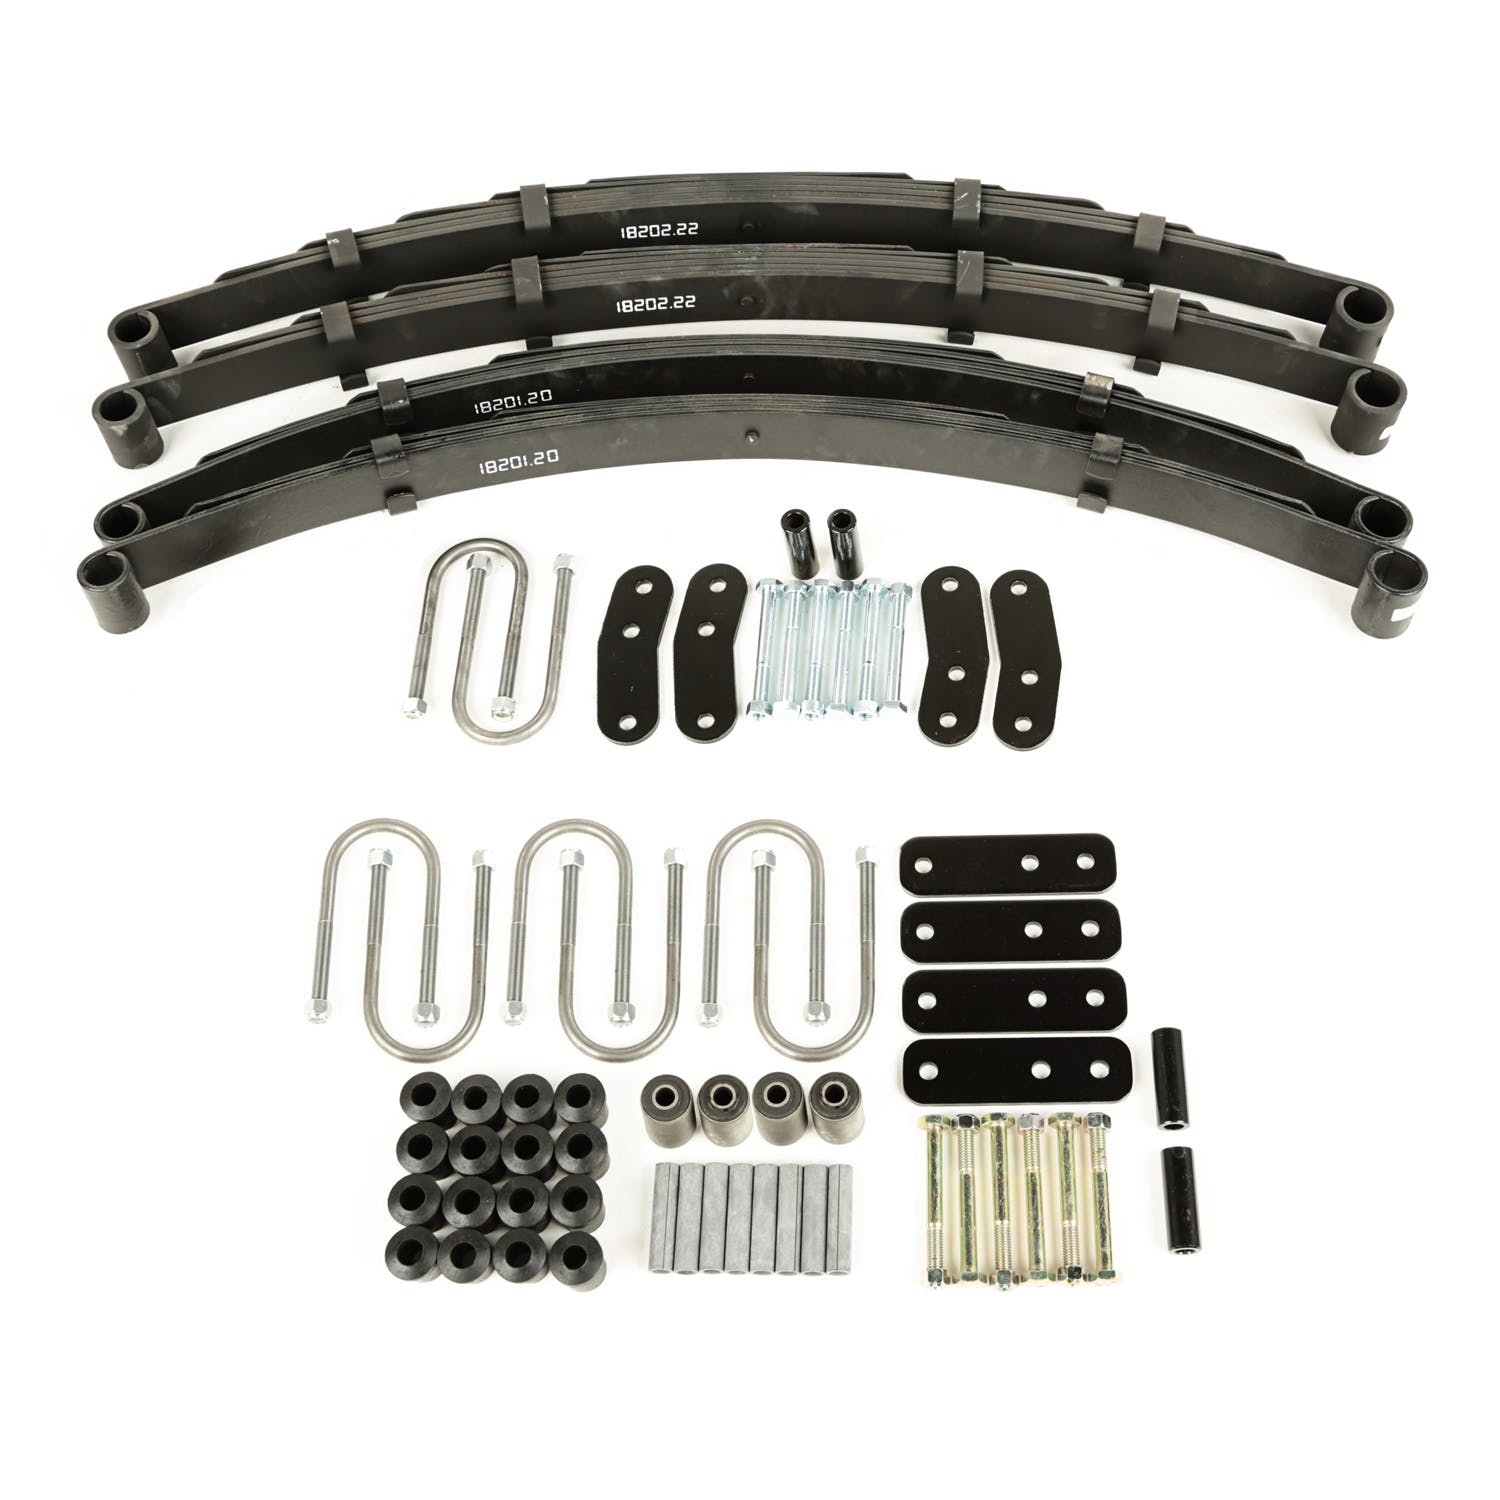 Omix-ADA 18290.12 Leaf Spring Kit, Front and Rear